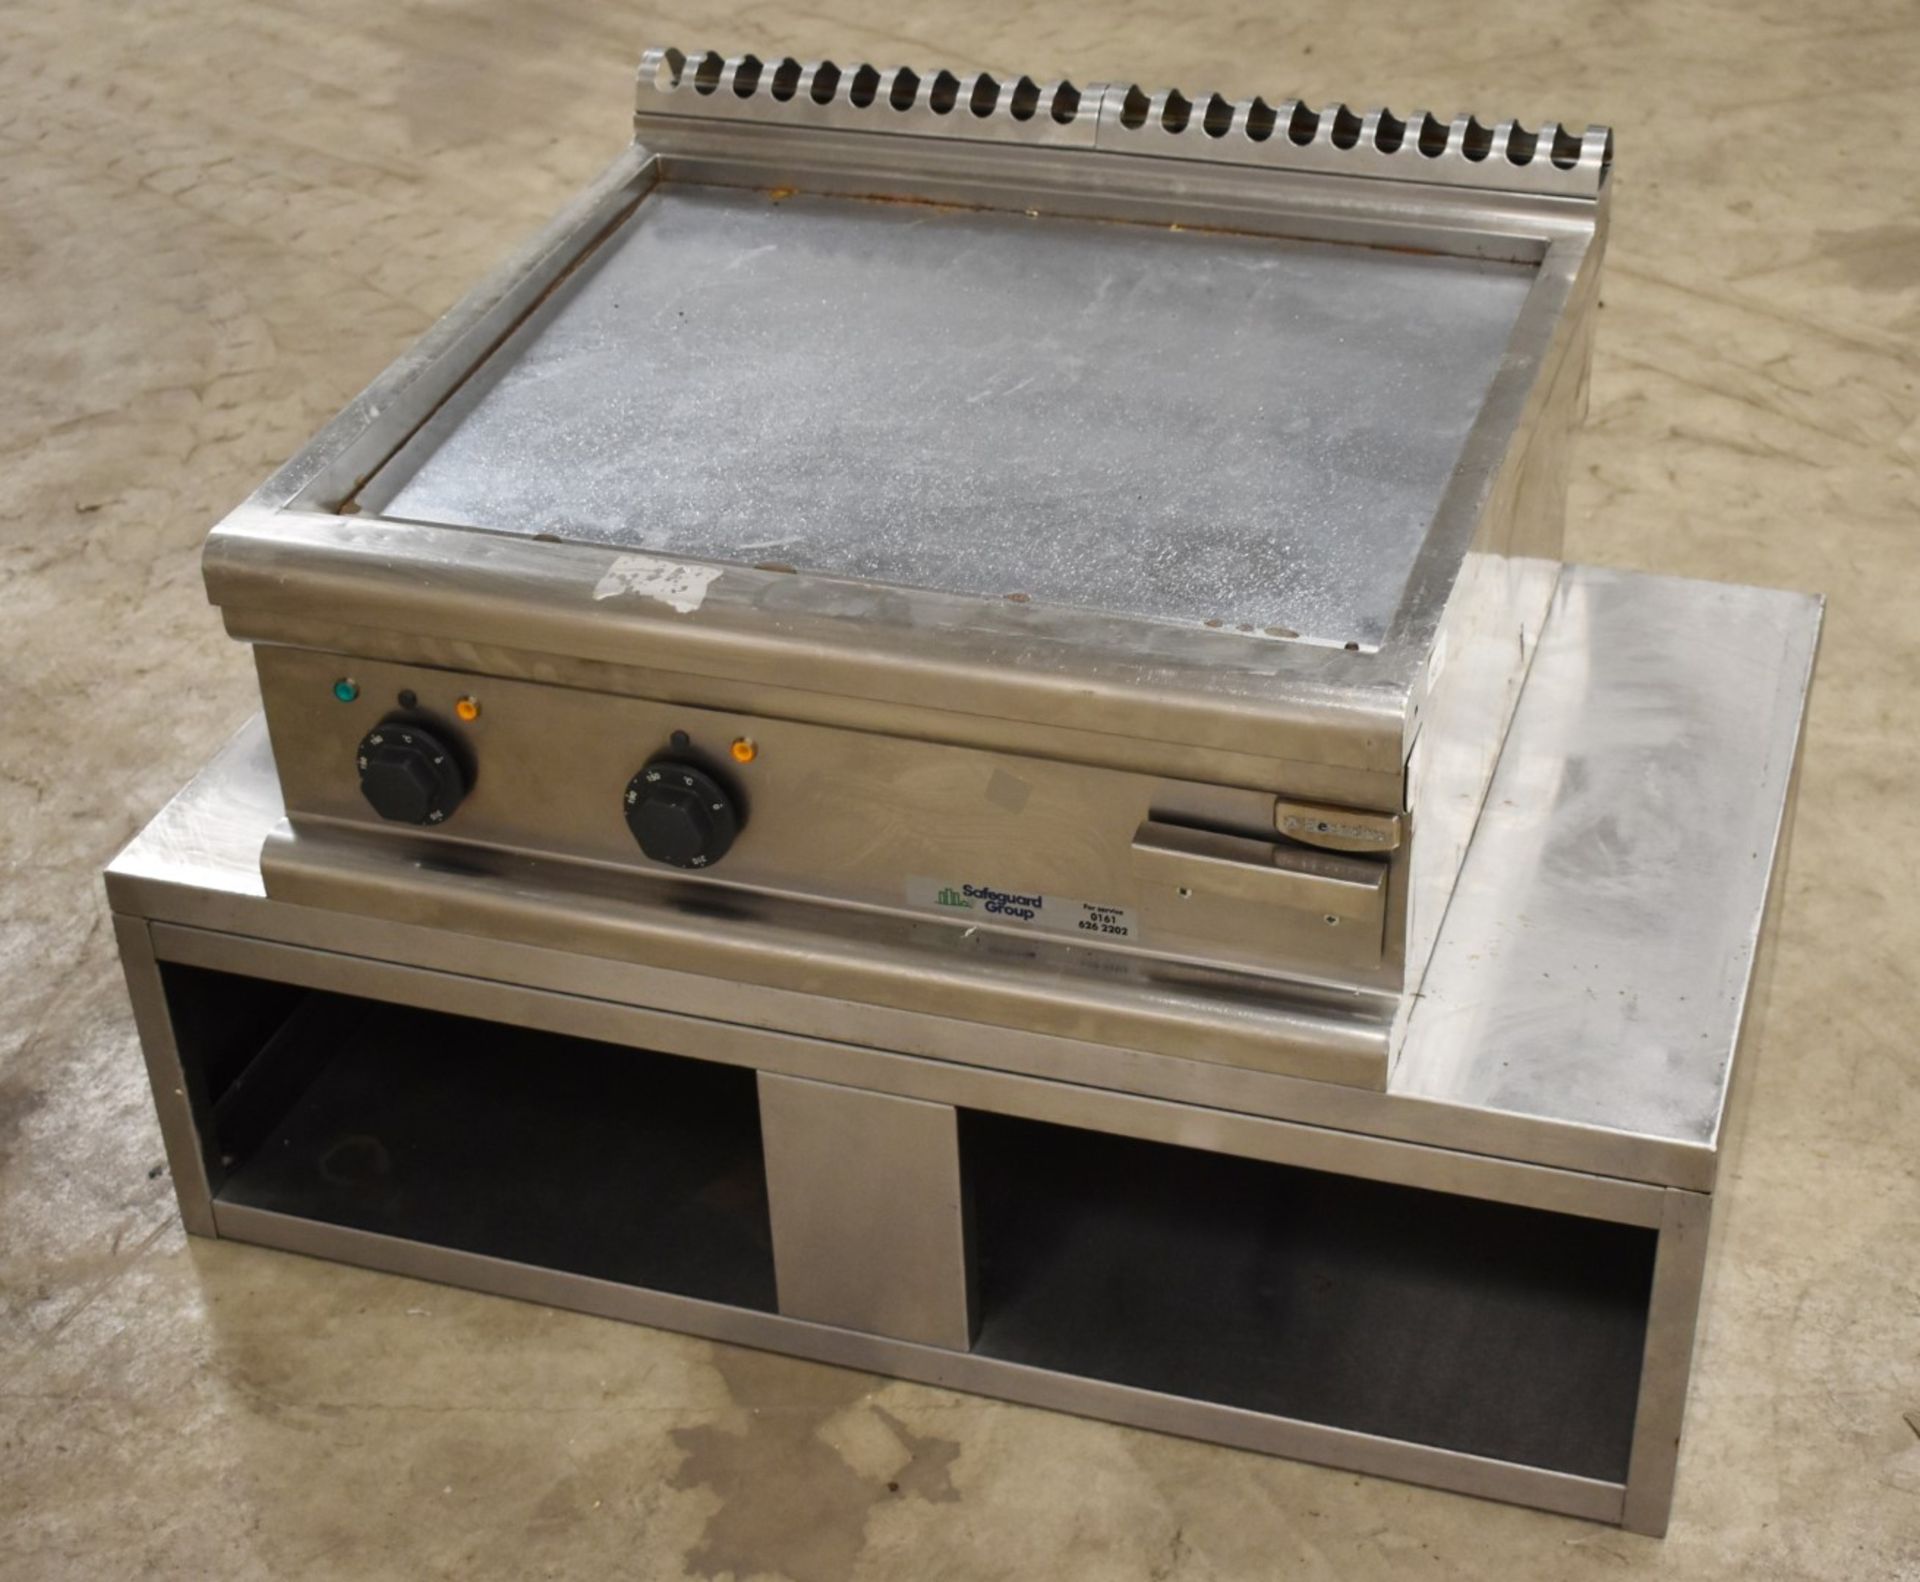 1 x Electrolux Countertop Commercial Solid Top Griddle With Stand - Electric Powered - CL232 - Ref